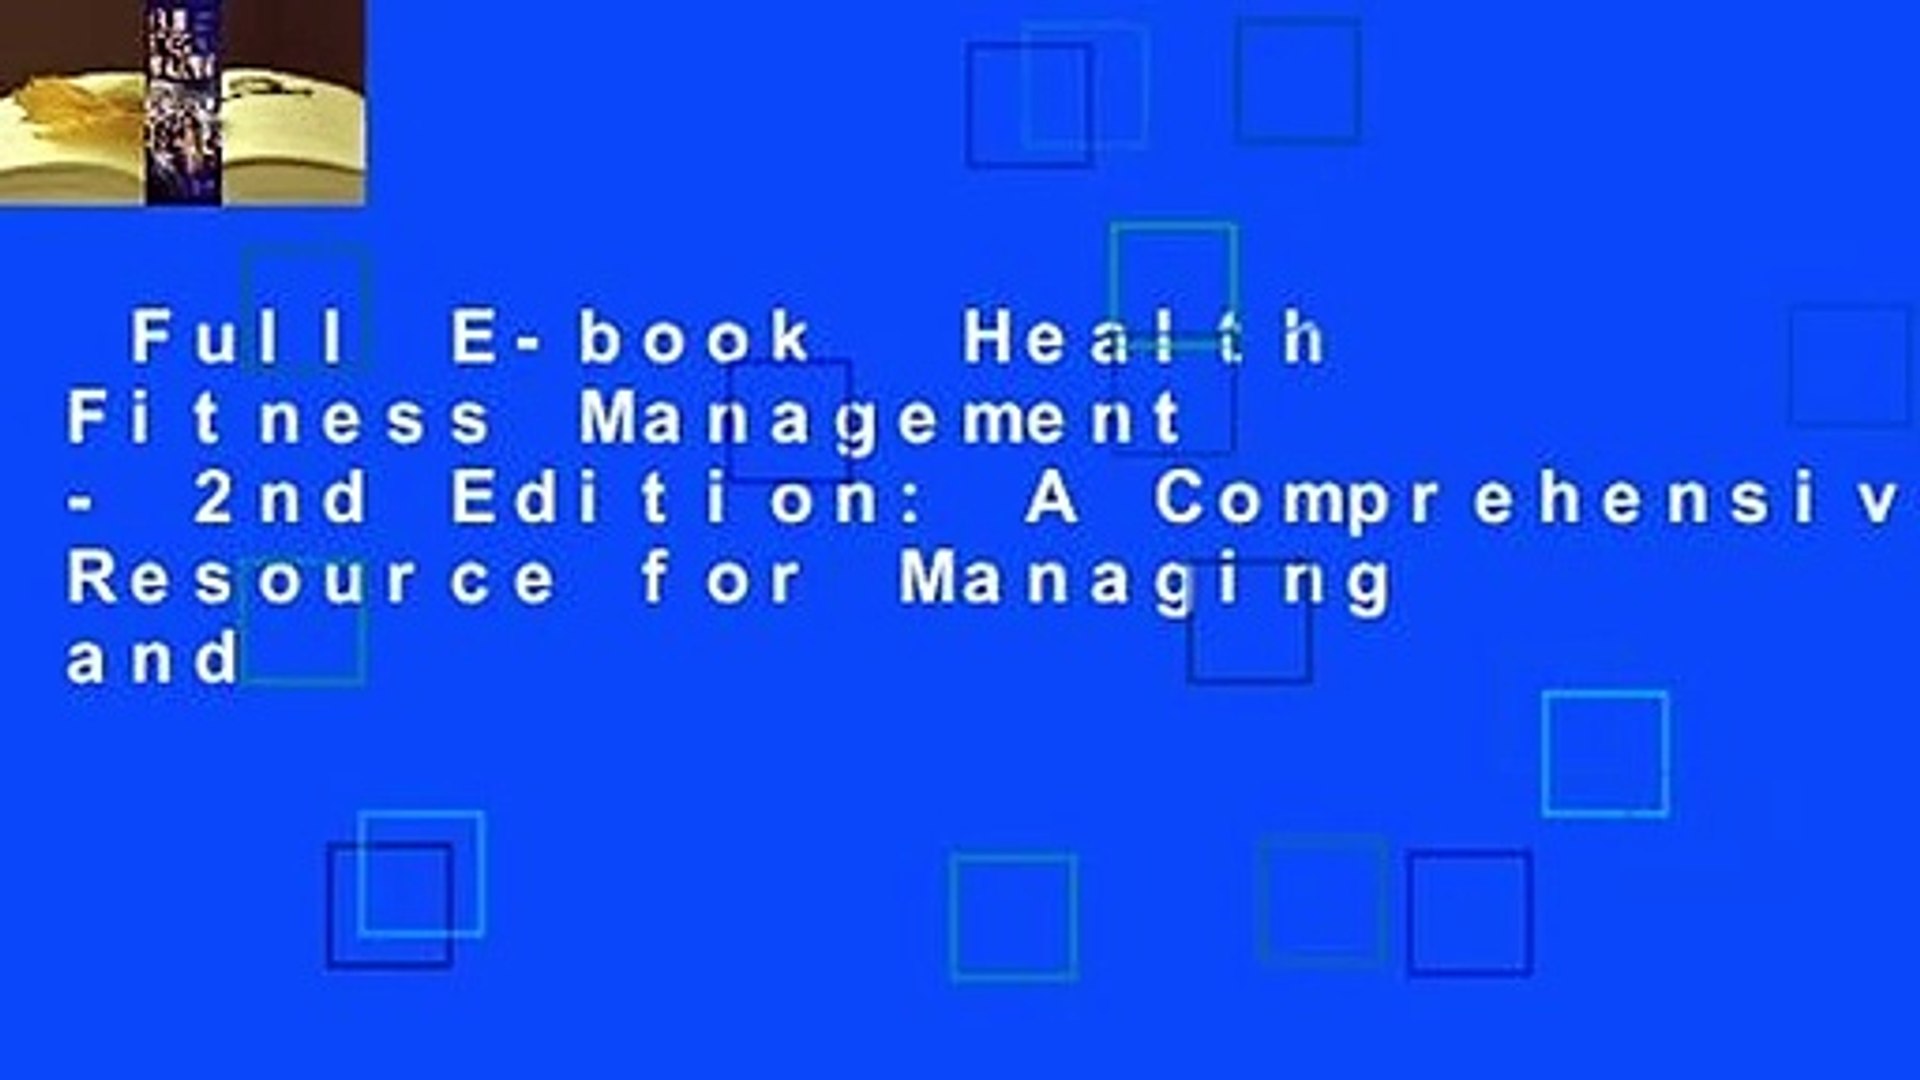 Full E-book  Health Fitness Management - 2nd Edition: A Comprehensive Resource for Managing and